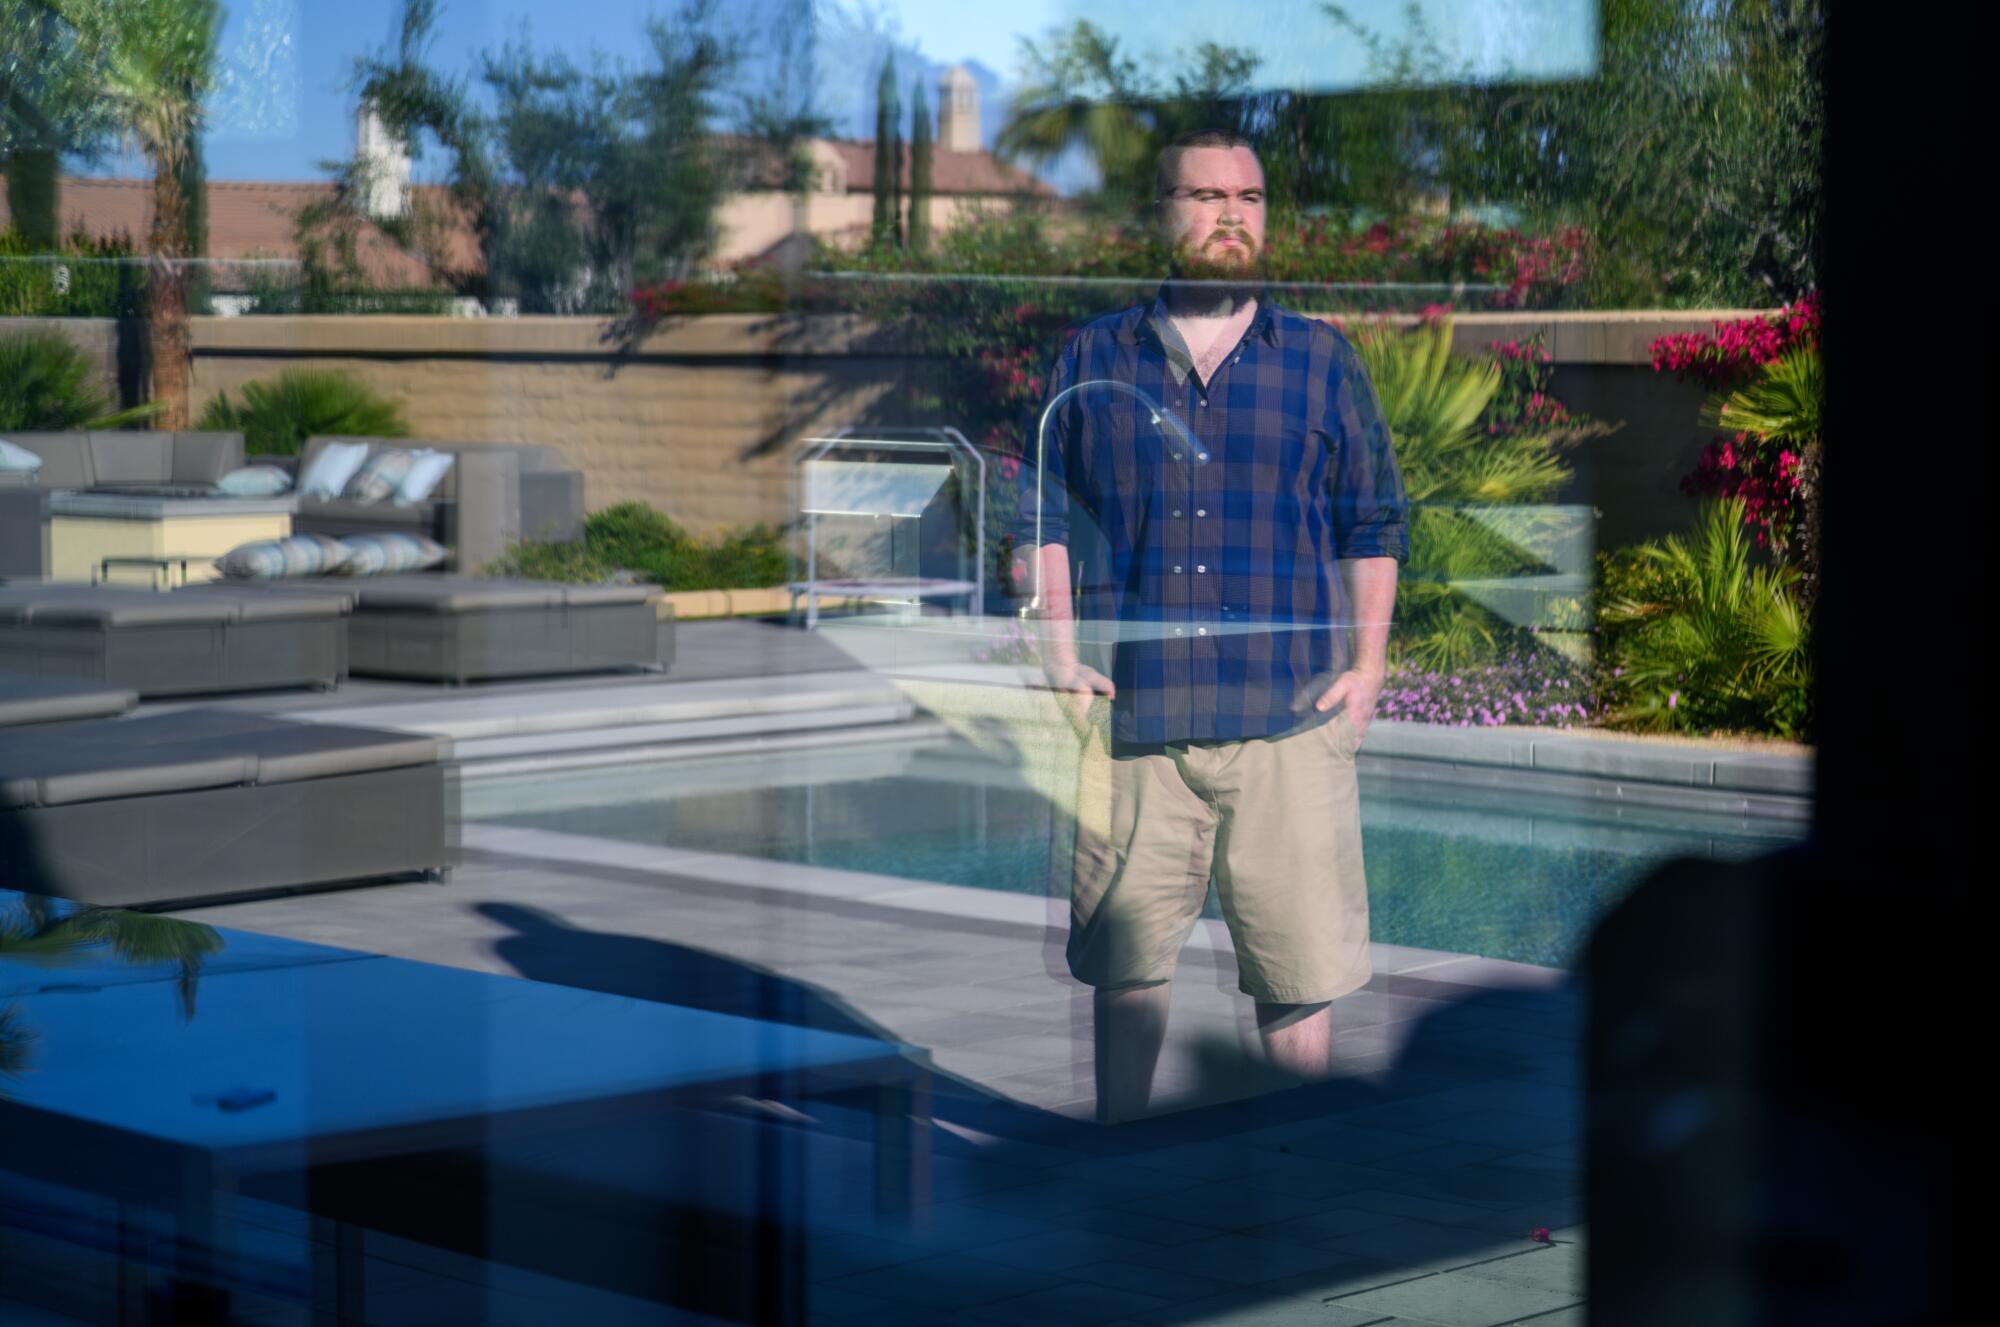 A man seen through a window stands outside near a swimming pool.